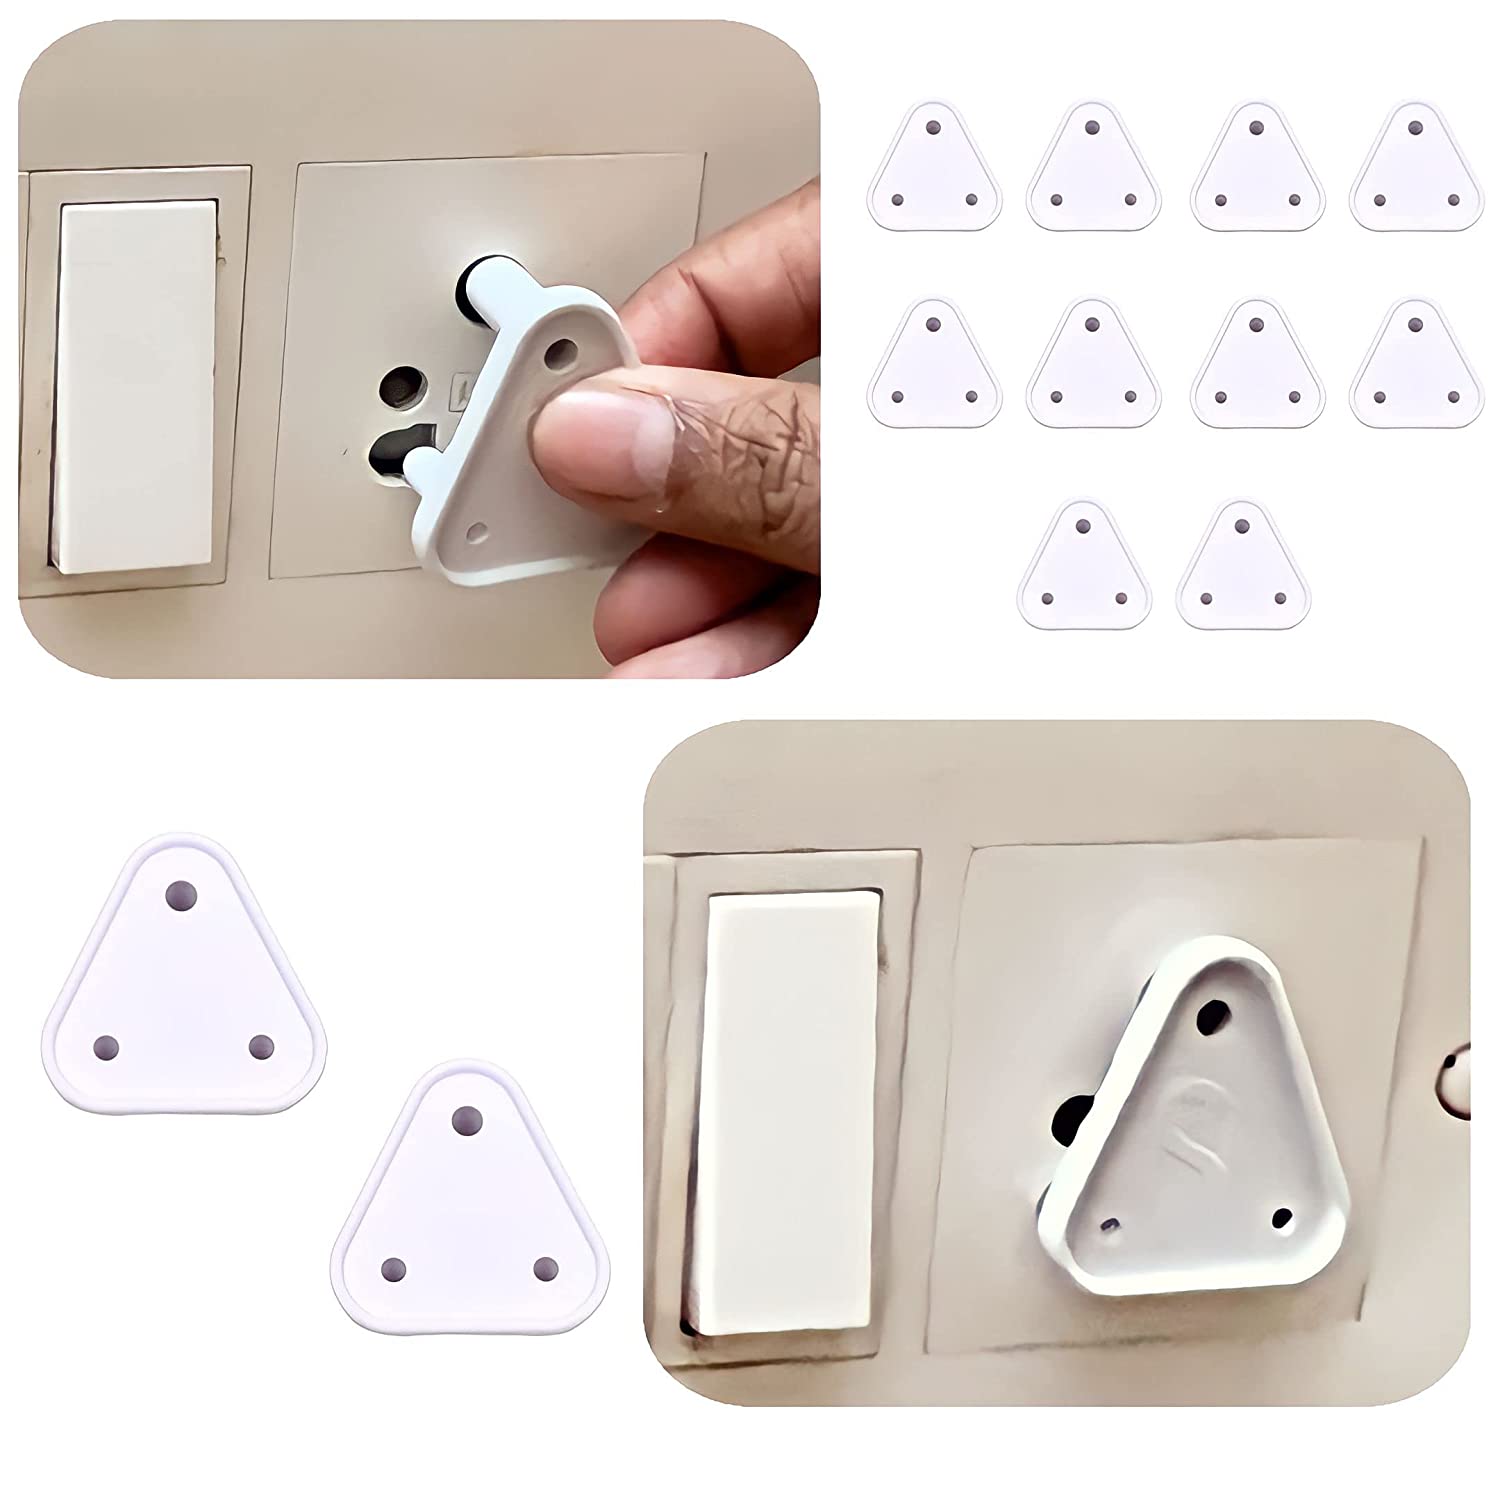 Baby-Proofing-Electrical-Protector-Socket-Plug-Cover-Guards---Pack-of-12